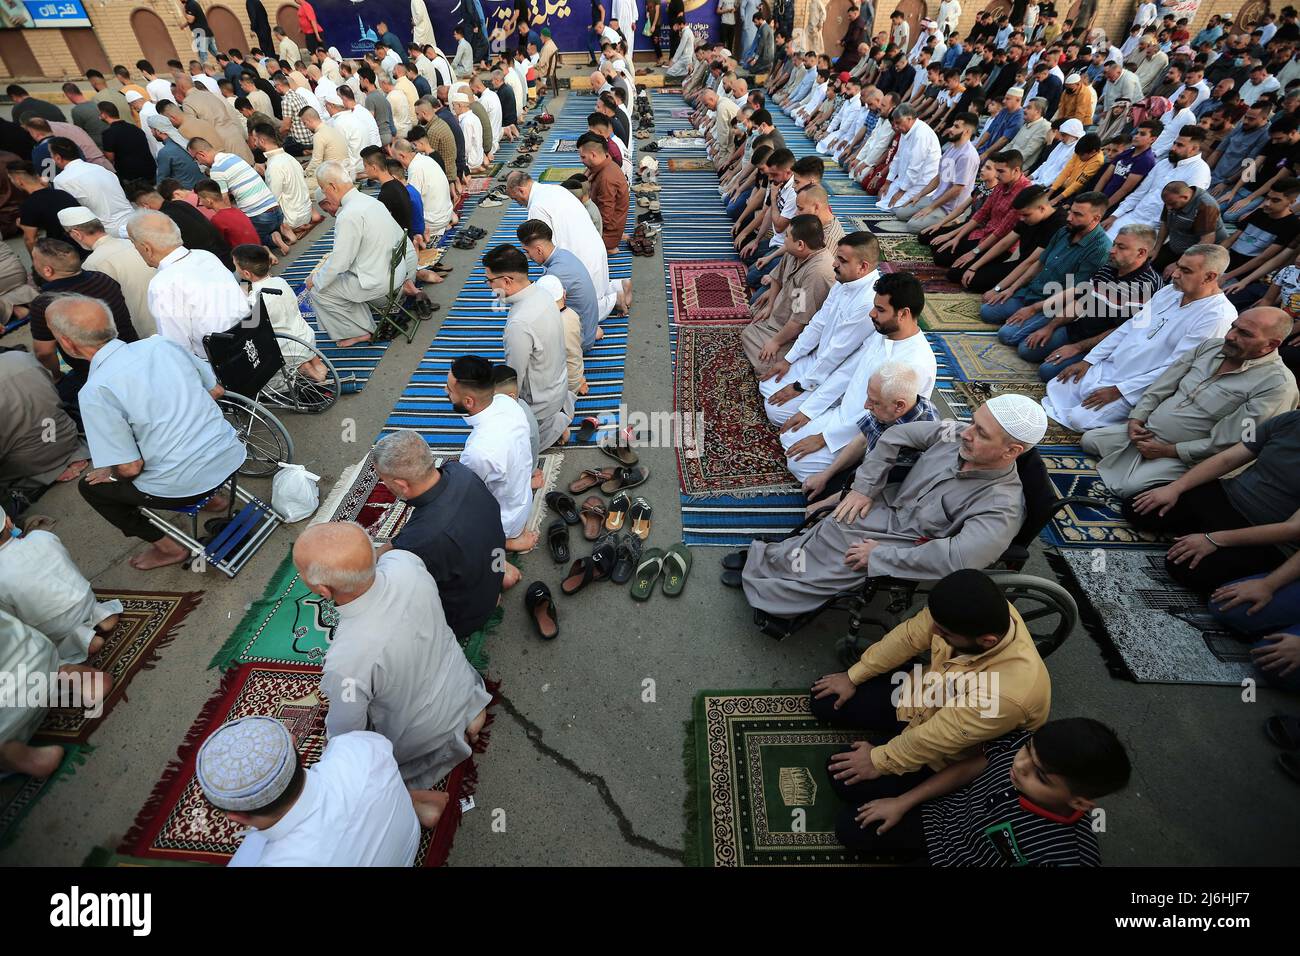 02 May 2022, Iraq, Baghdad: Iraqi worshippers perform Eid al-Fitr prayer, which marks the end of the Muslim holy month of Ramadan, at Abu Hanifah an-Nu'man Mosque in the al-Adhamiyah district of northern Baghdad. Photo: Ameer Al-Mohammedawi/dpa Stock Photo